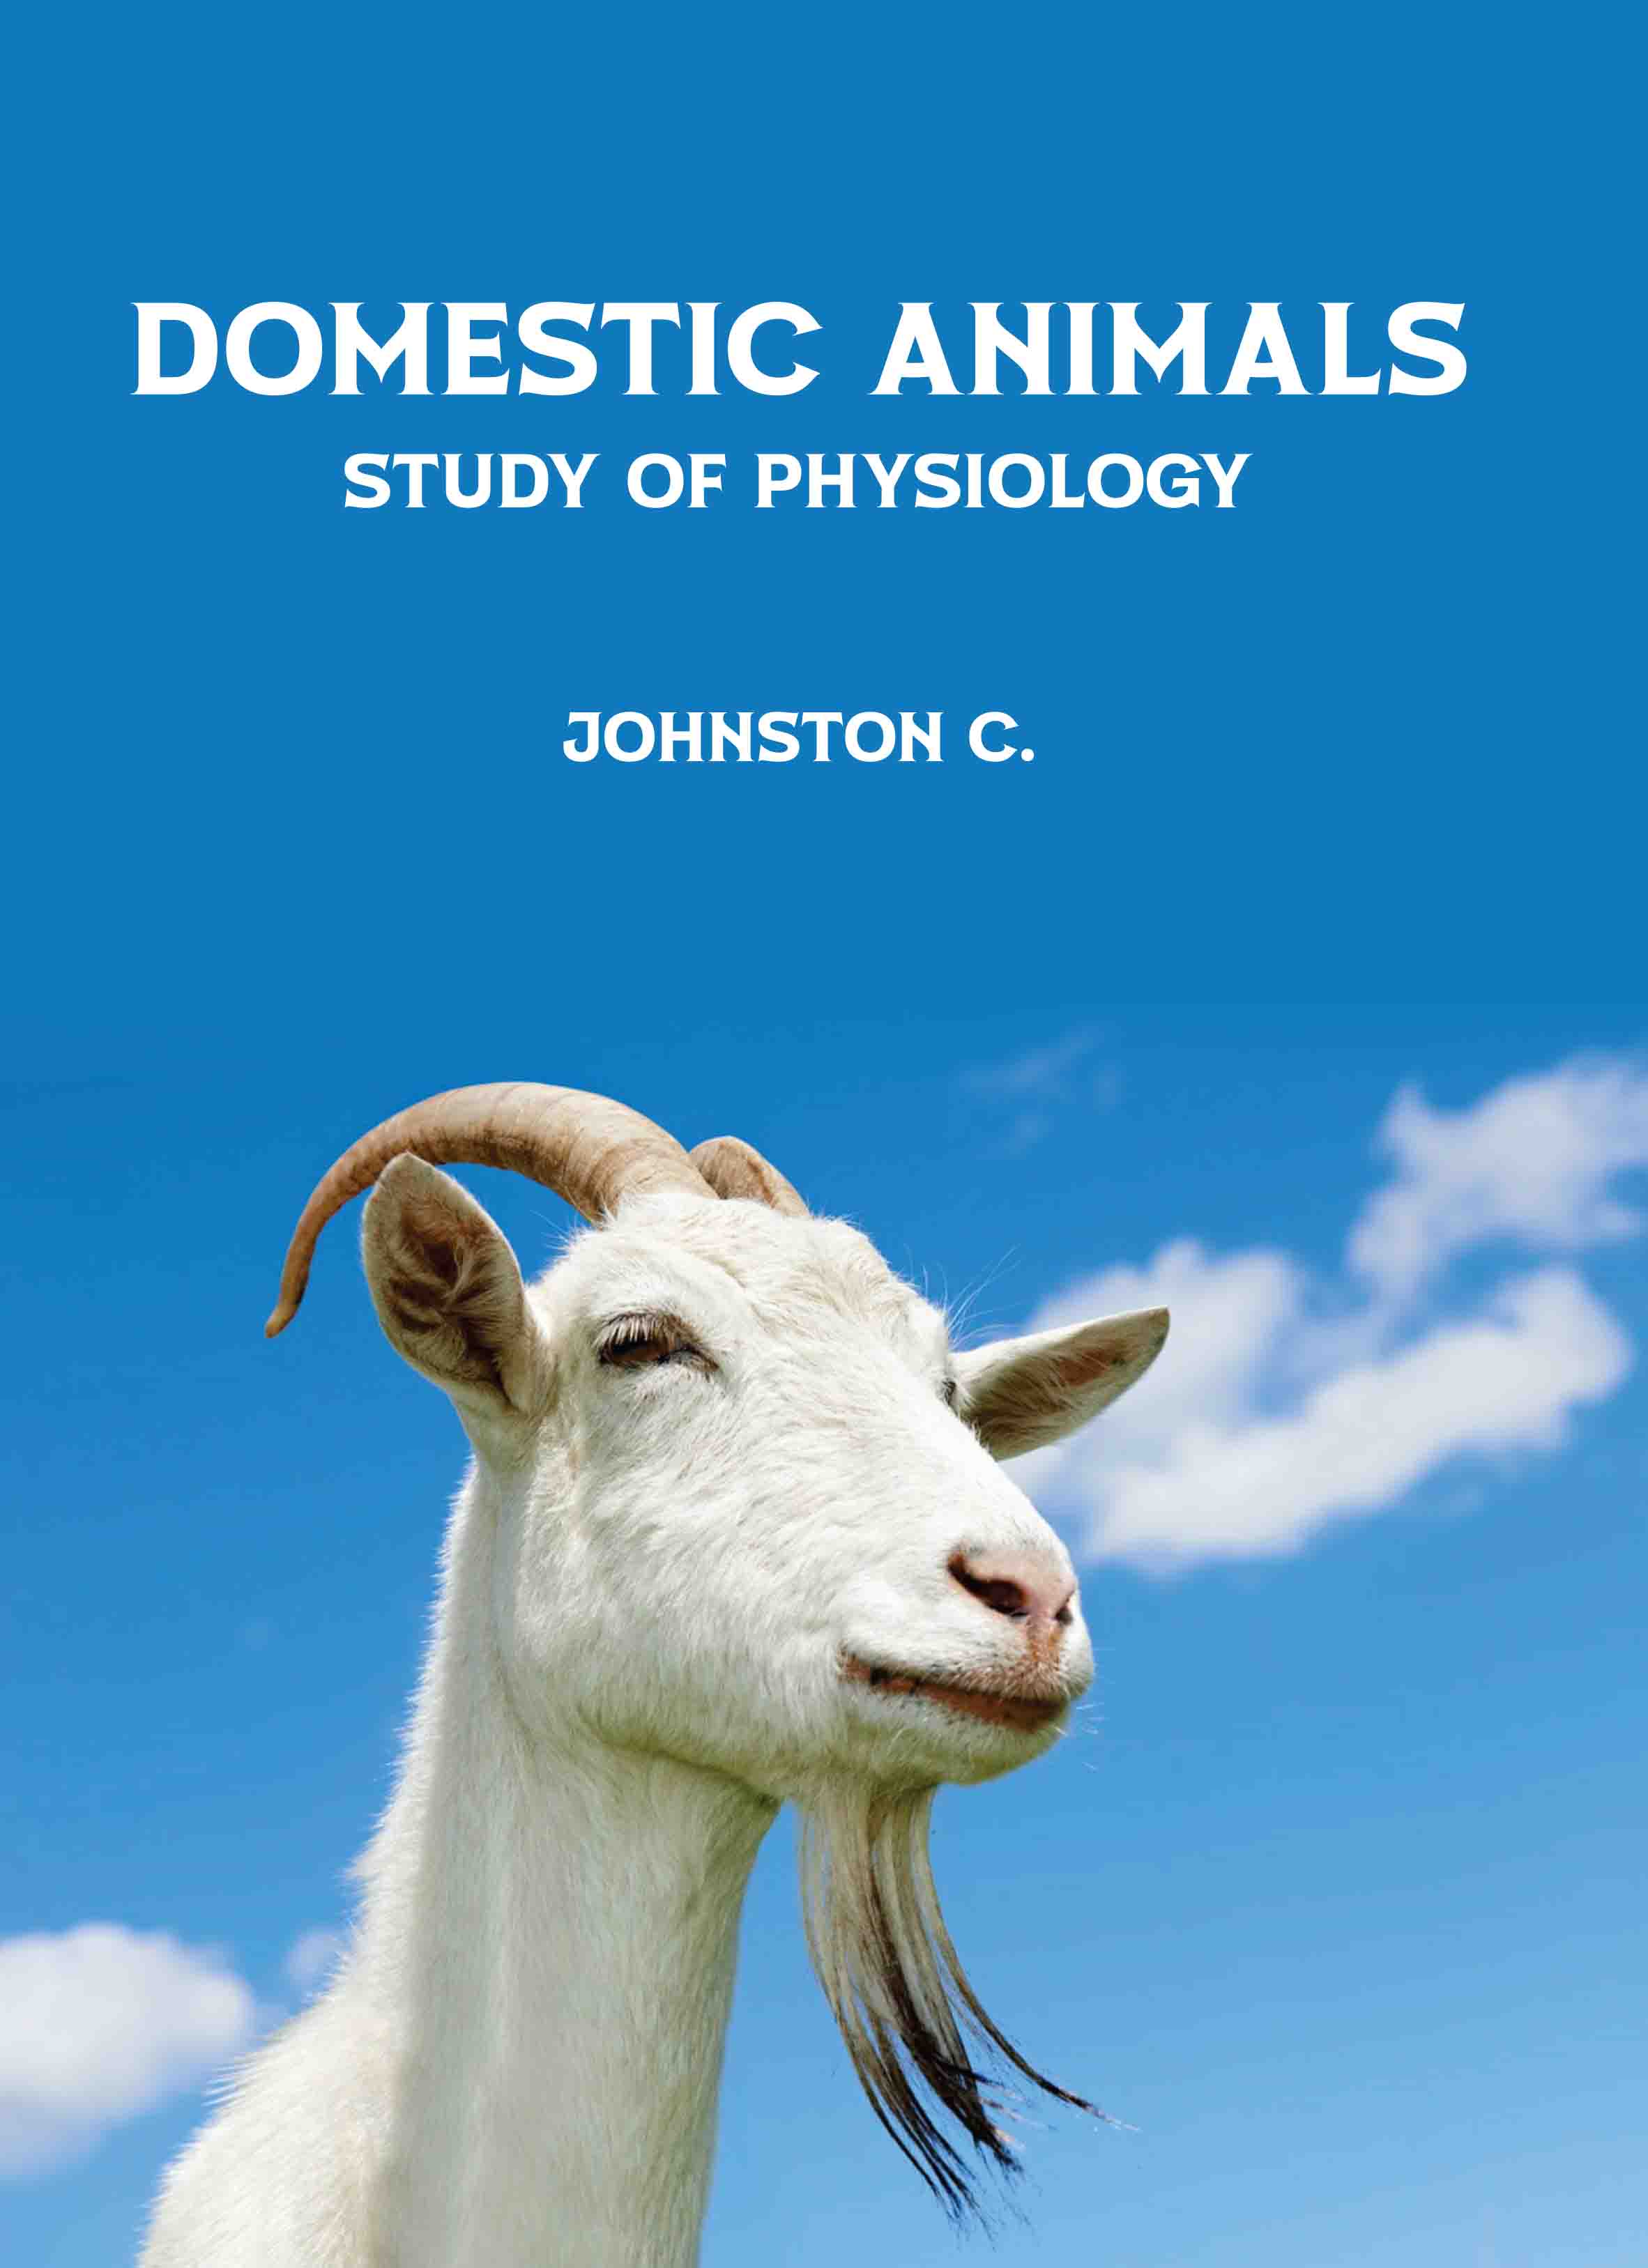 Domestic Animals: Study of Physiology